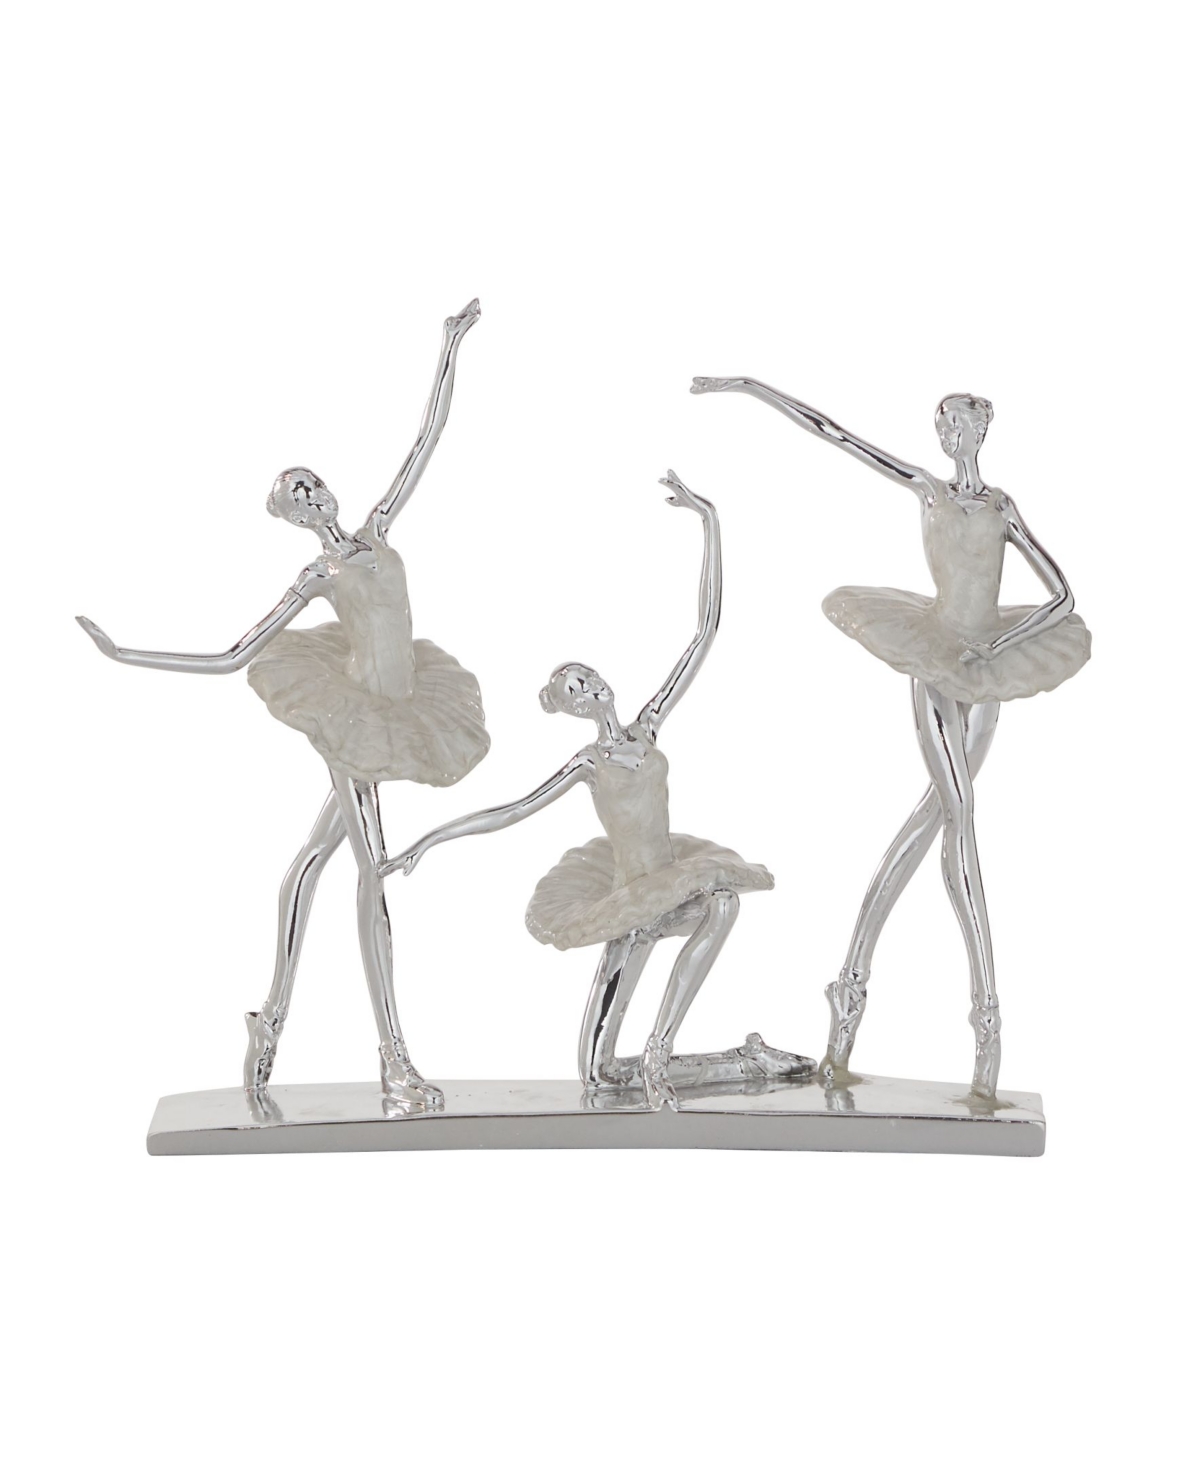 Rosemary Lane Glam Dancer Sculpture, 12" X 14" In Silver-tone